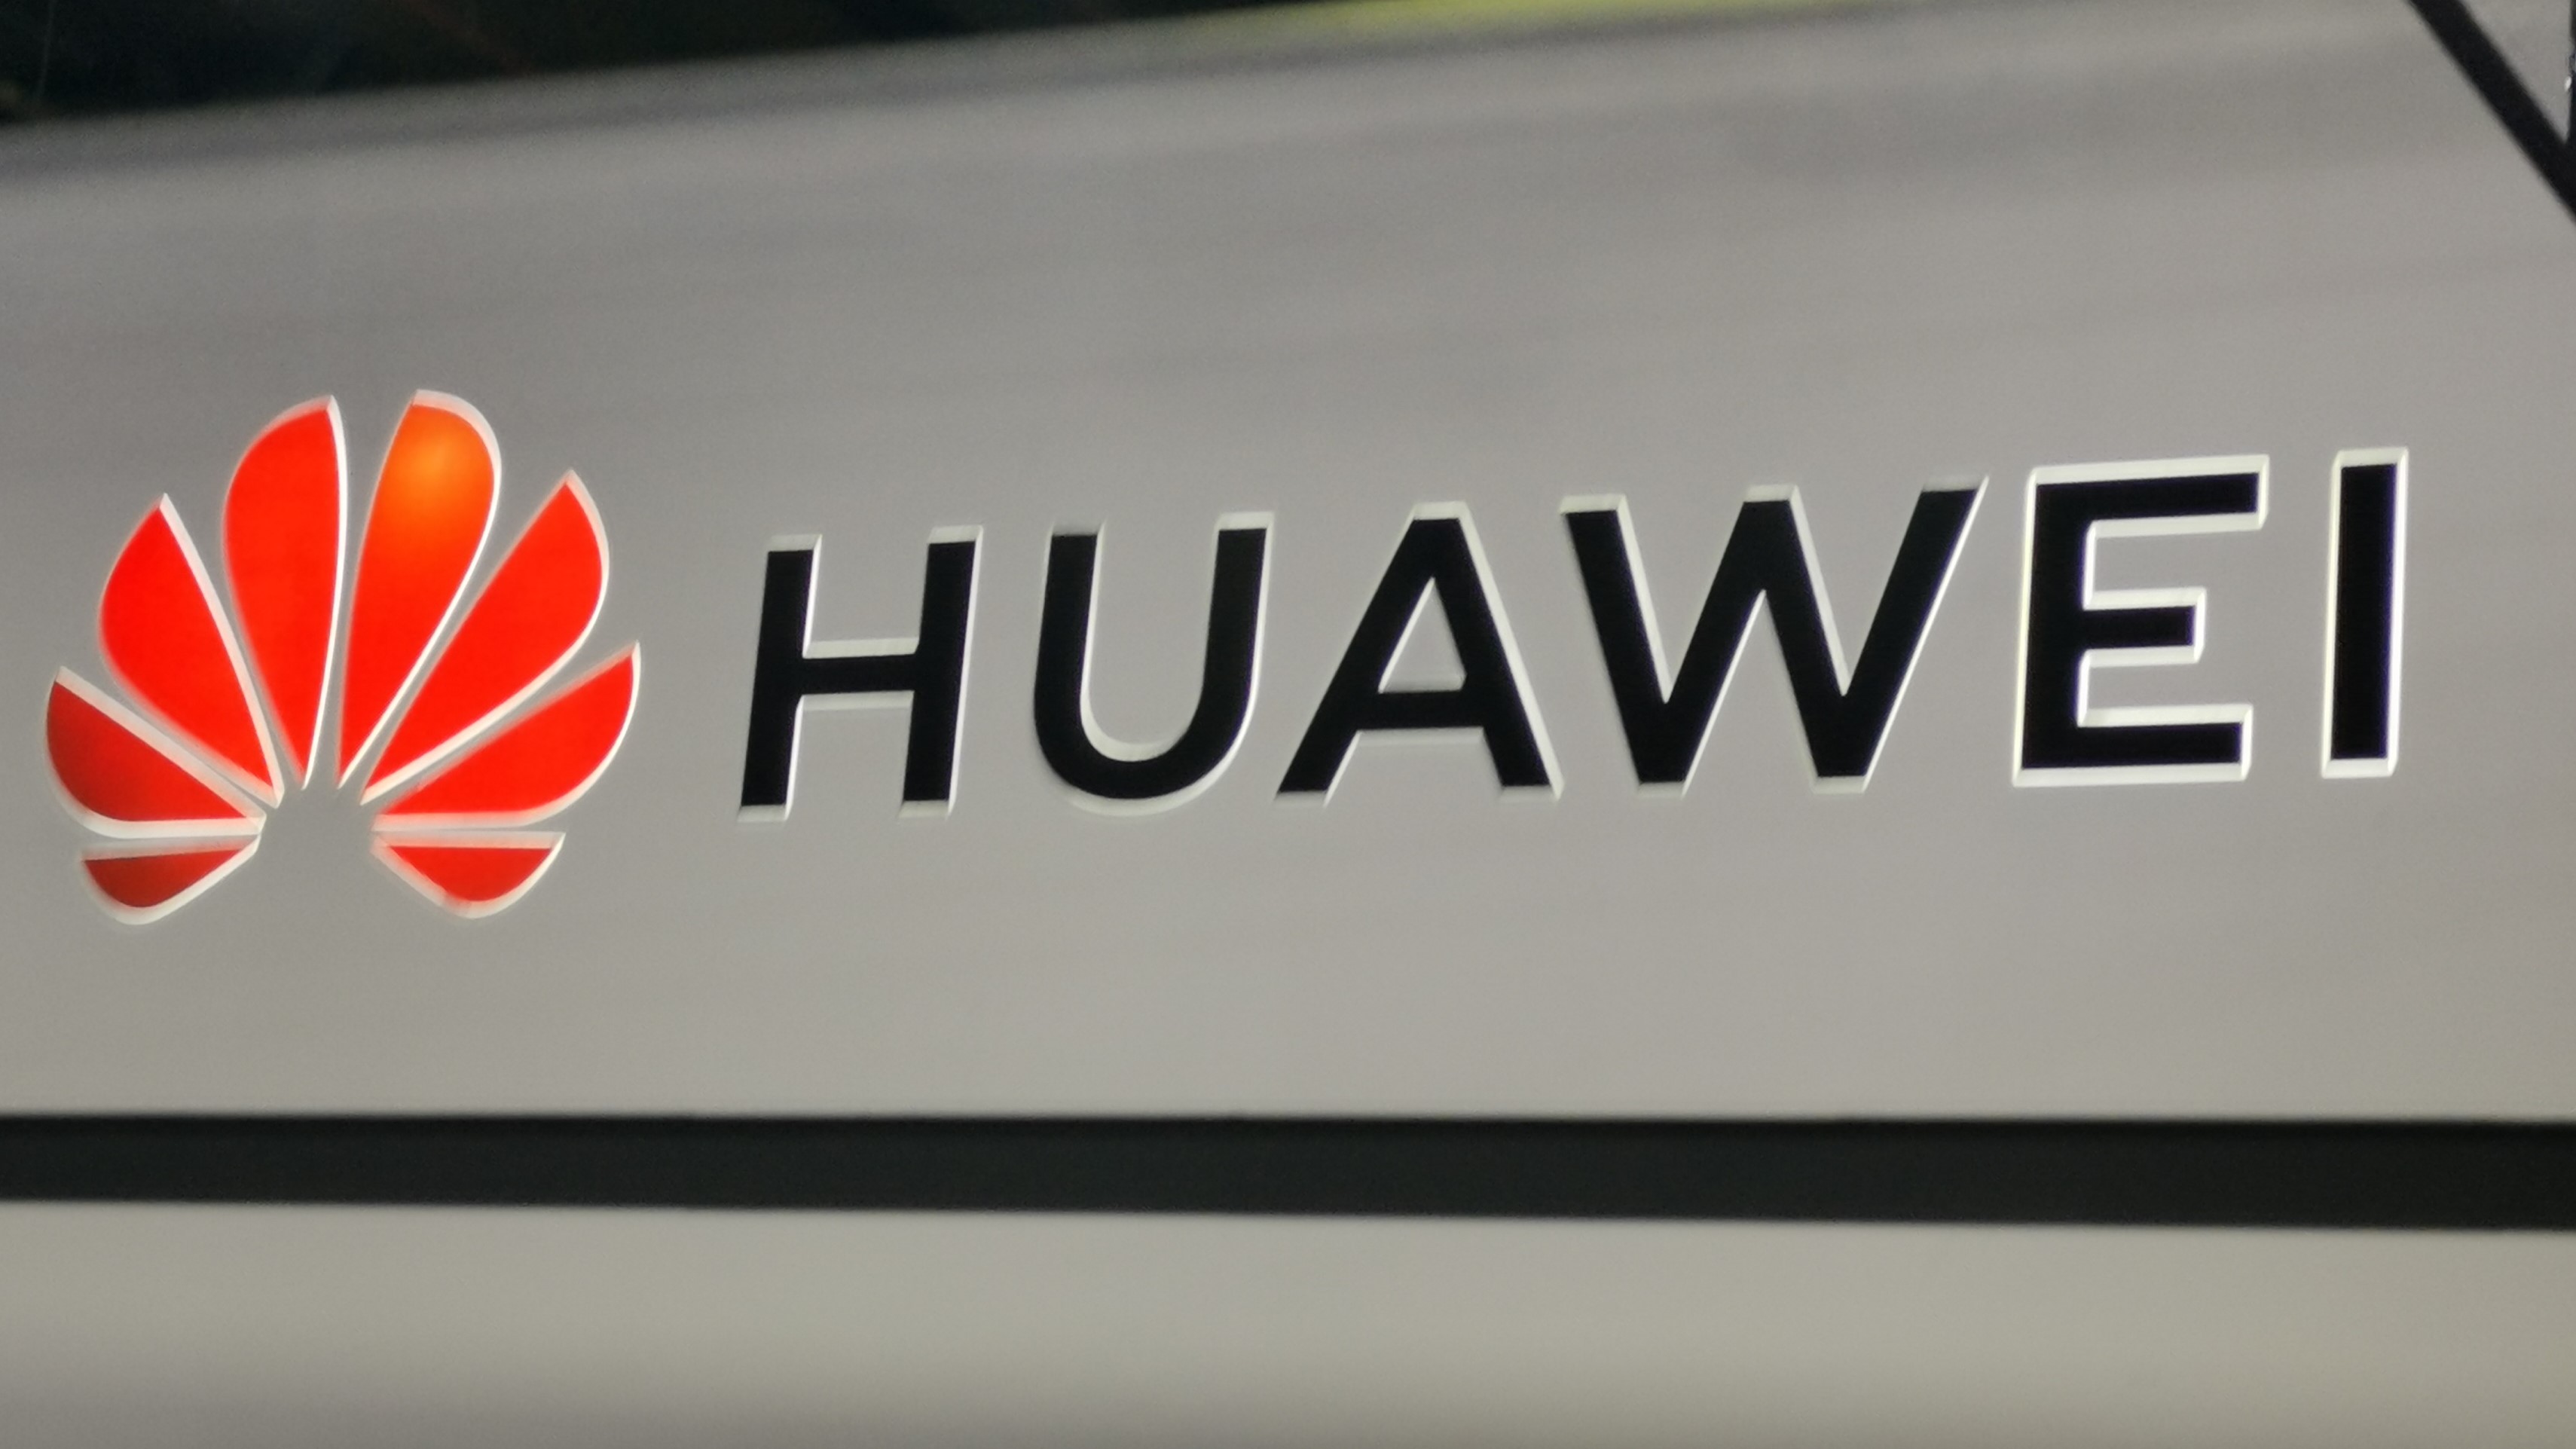 A Huawei graphics card for servers may be coming soon